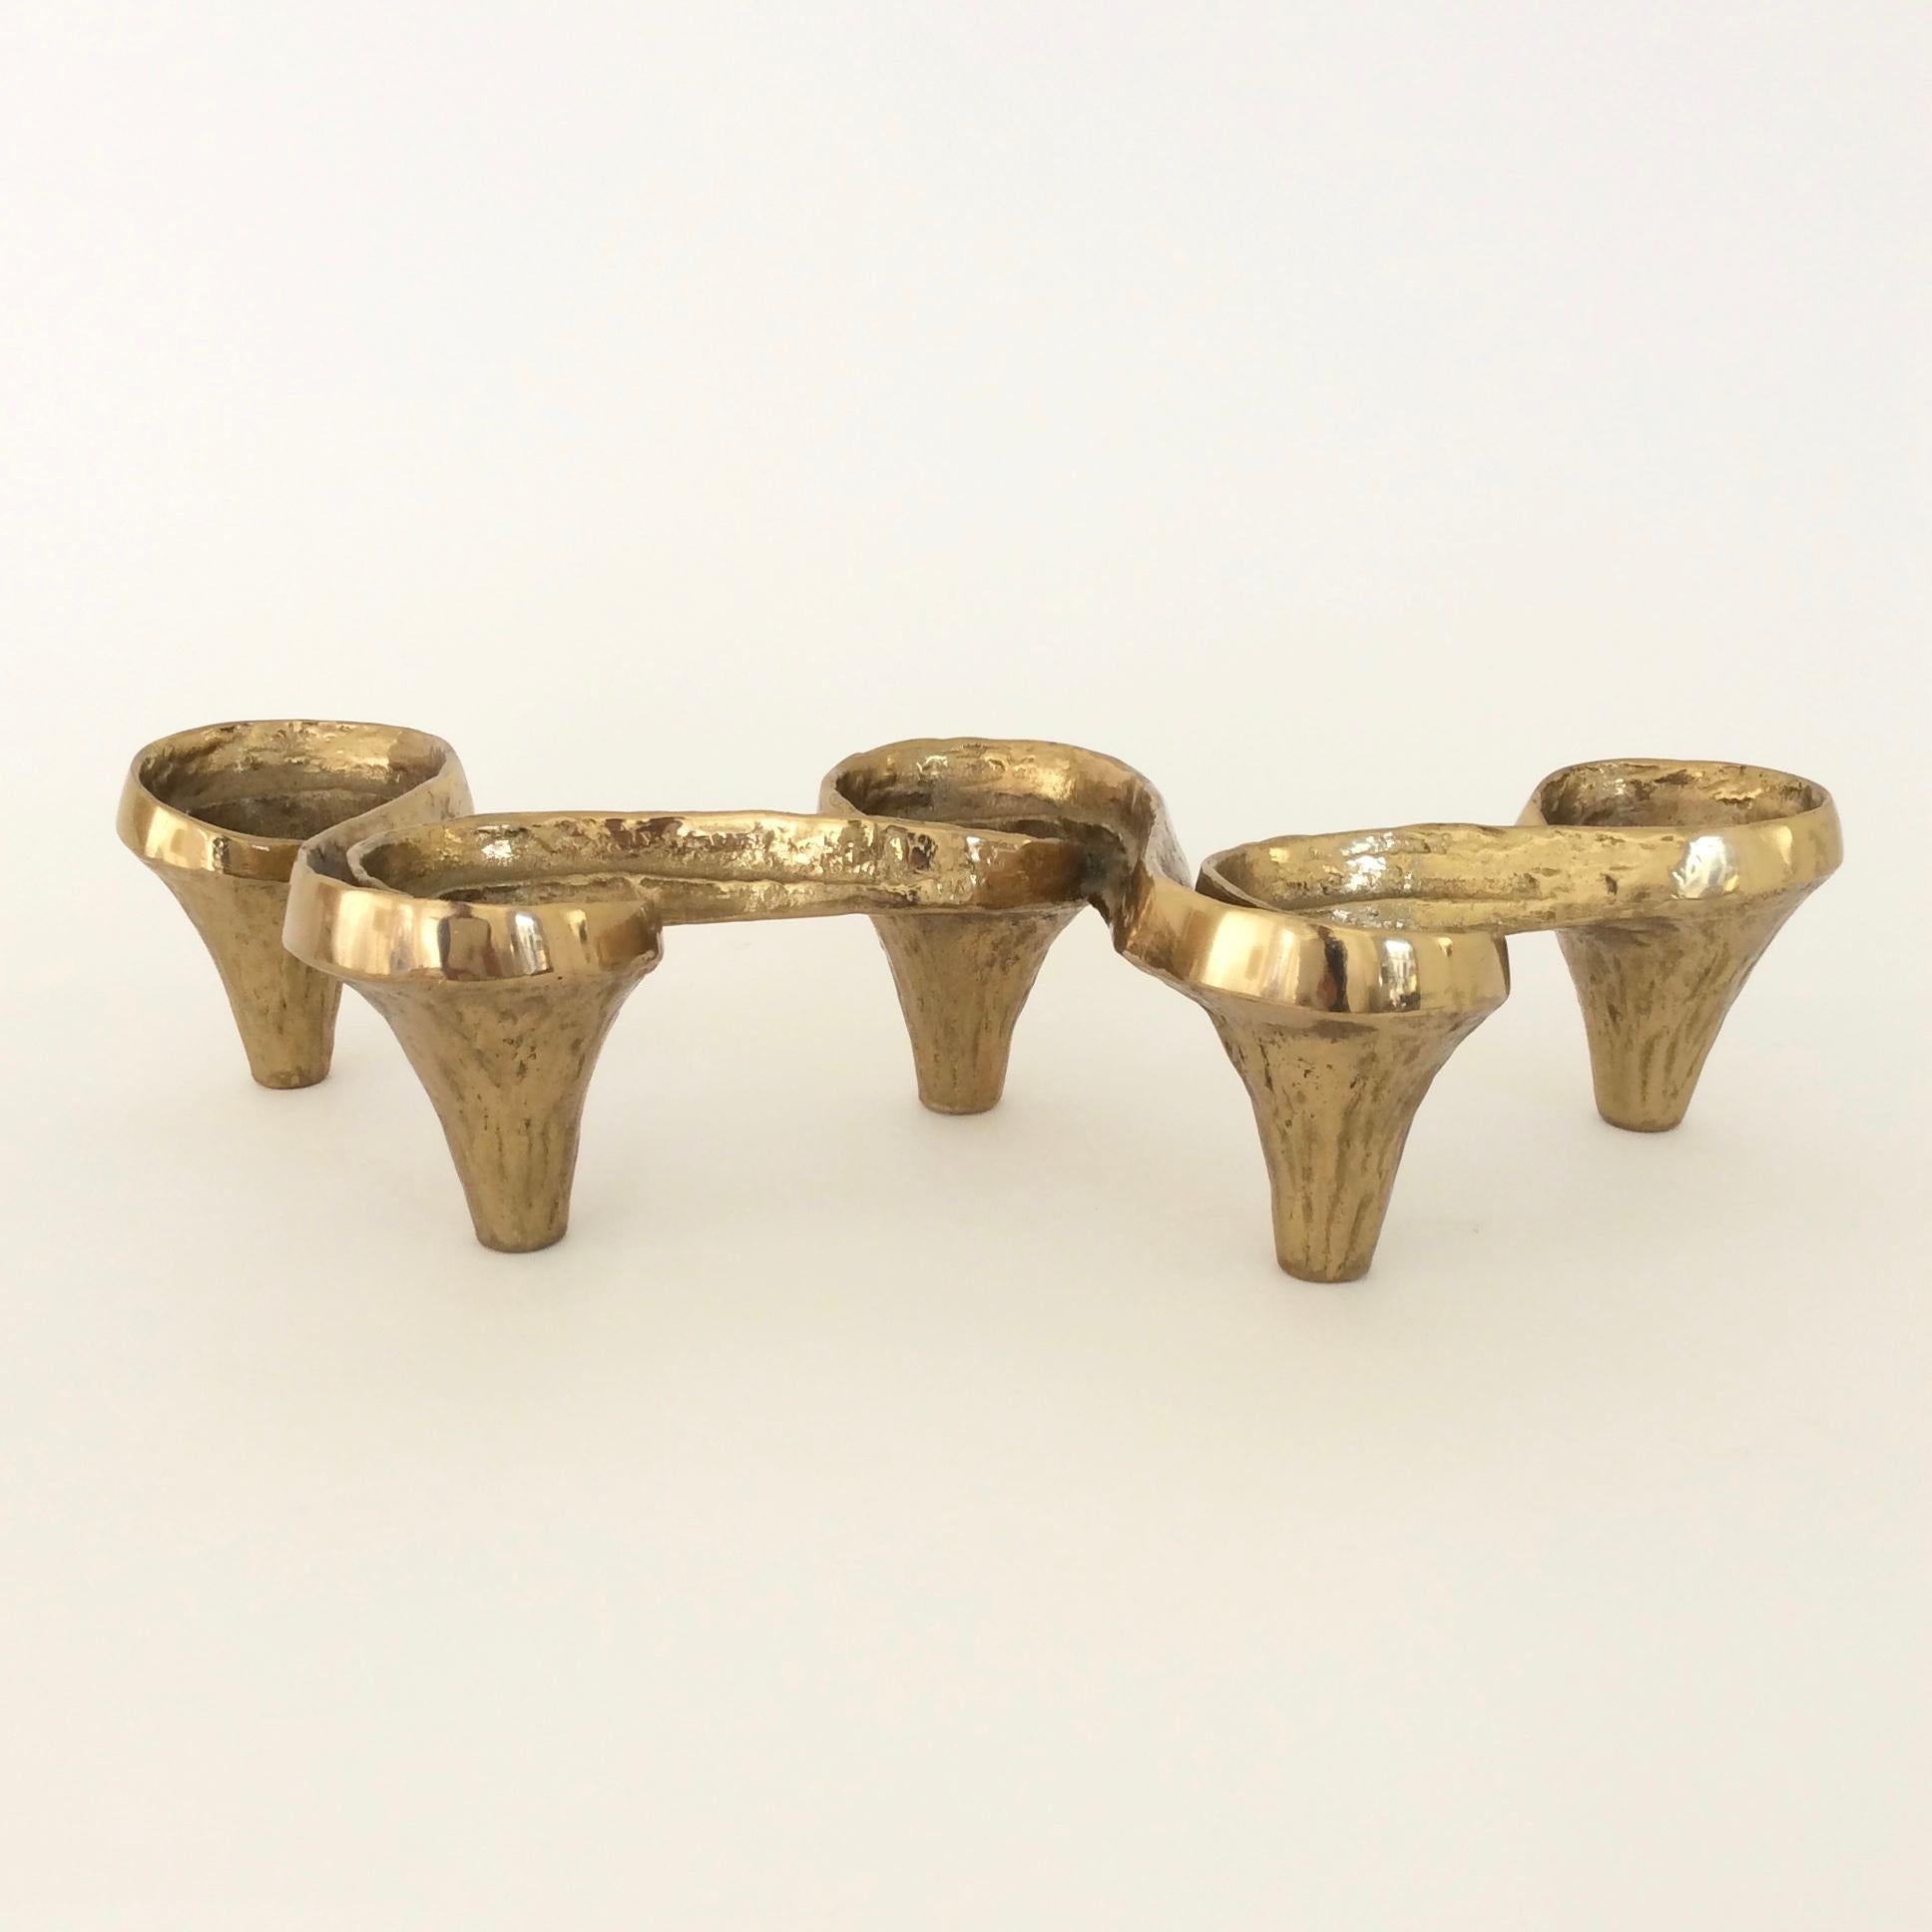 Elegant gold bronze candleholders, circa 1980, France.
For five candles. Possibly designed by Garouste & Bonetti.
Dimensions: 33 cm W, 13 cm D, 7 cm H.
Good original condition.
We ship worldwide.